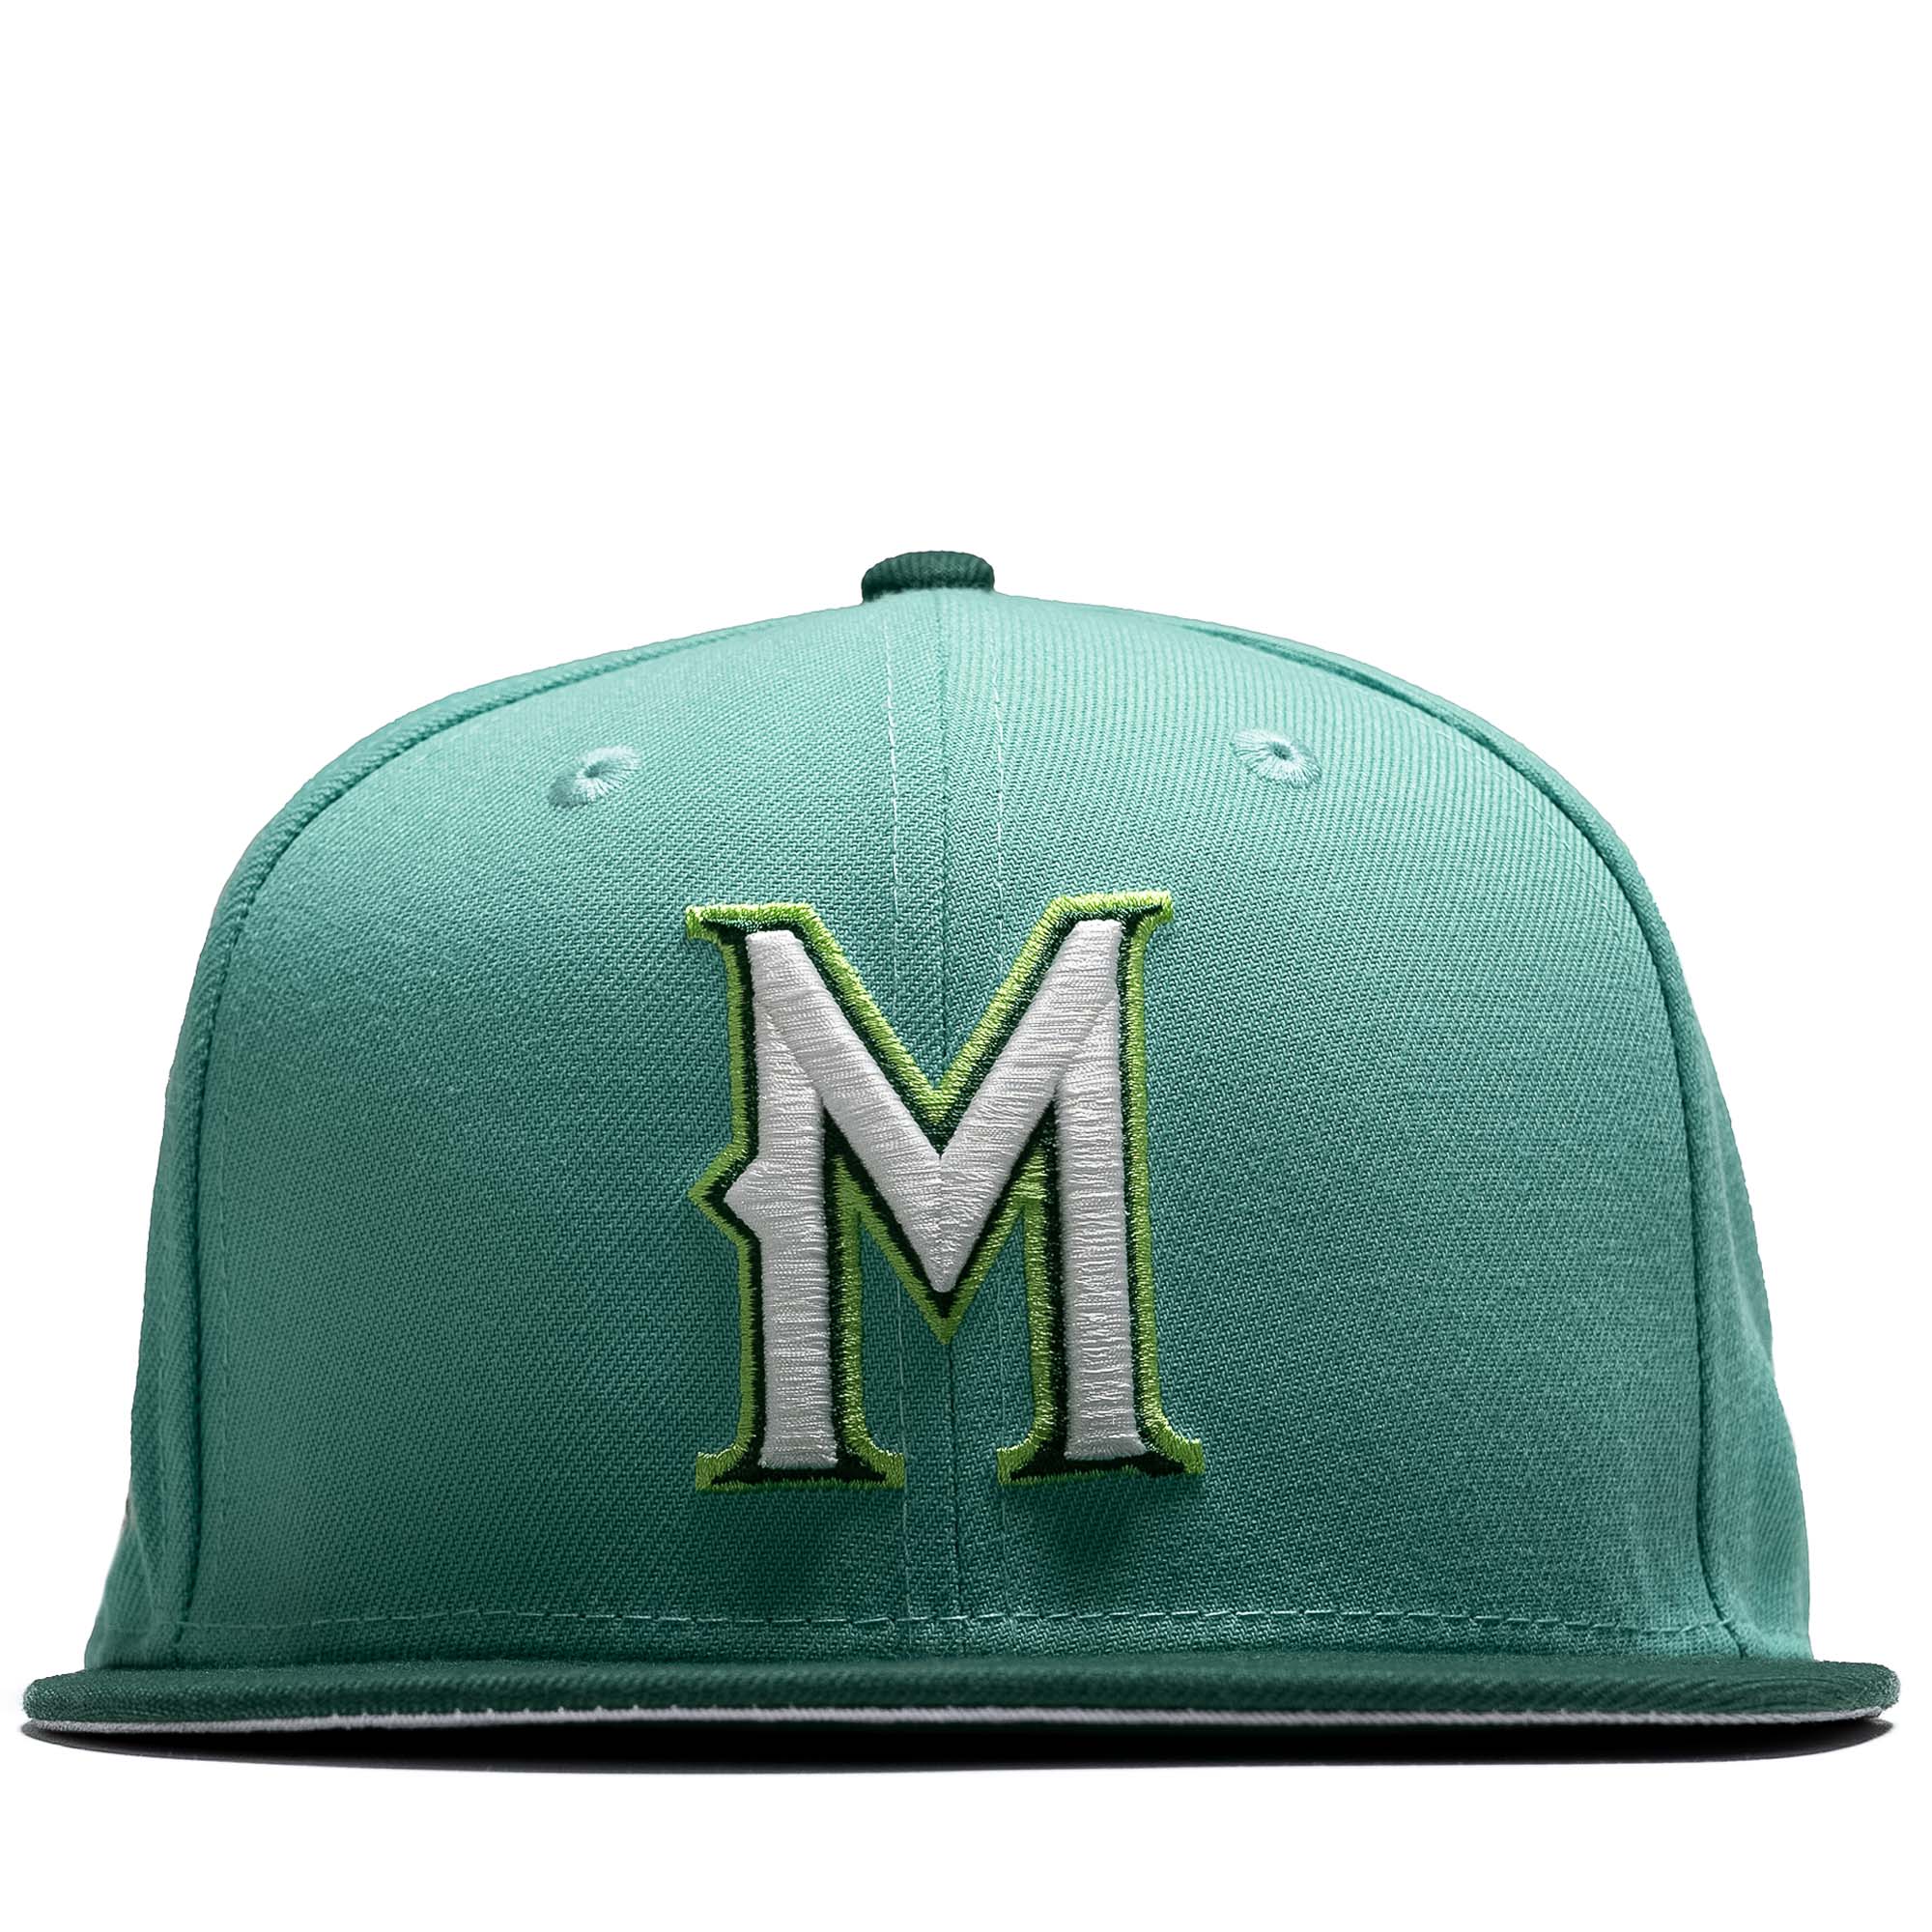 New Era x Politics Milwaukee Brewers 59FIFTY Fitted Hat - Mint/Green, Size 7 1/8 by Sneaker Politics